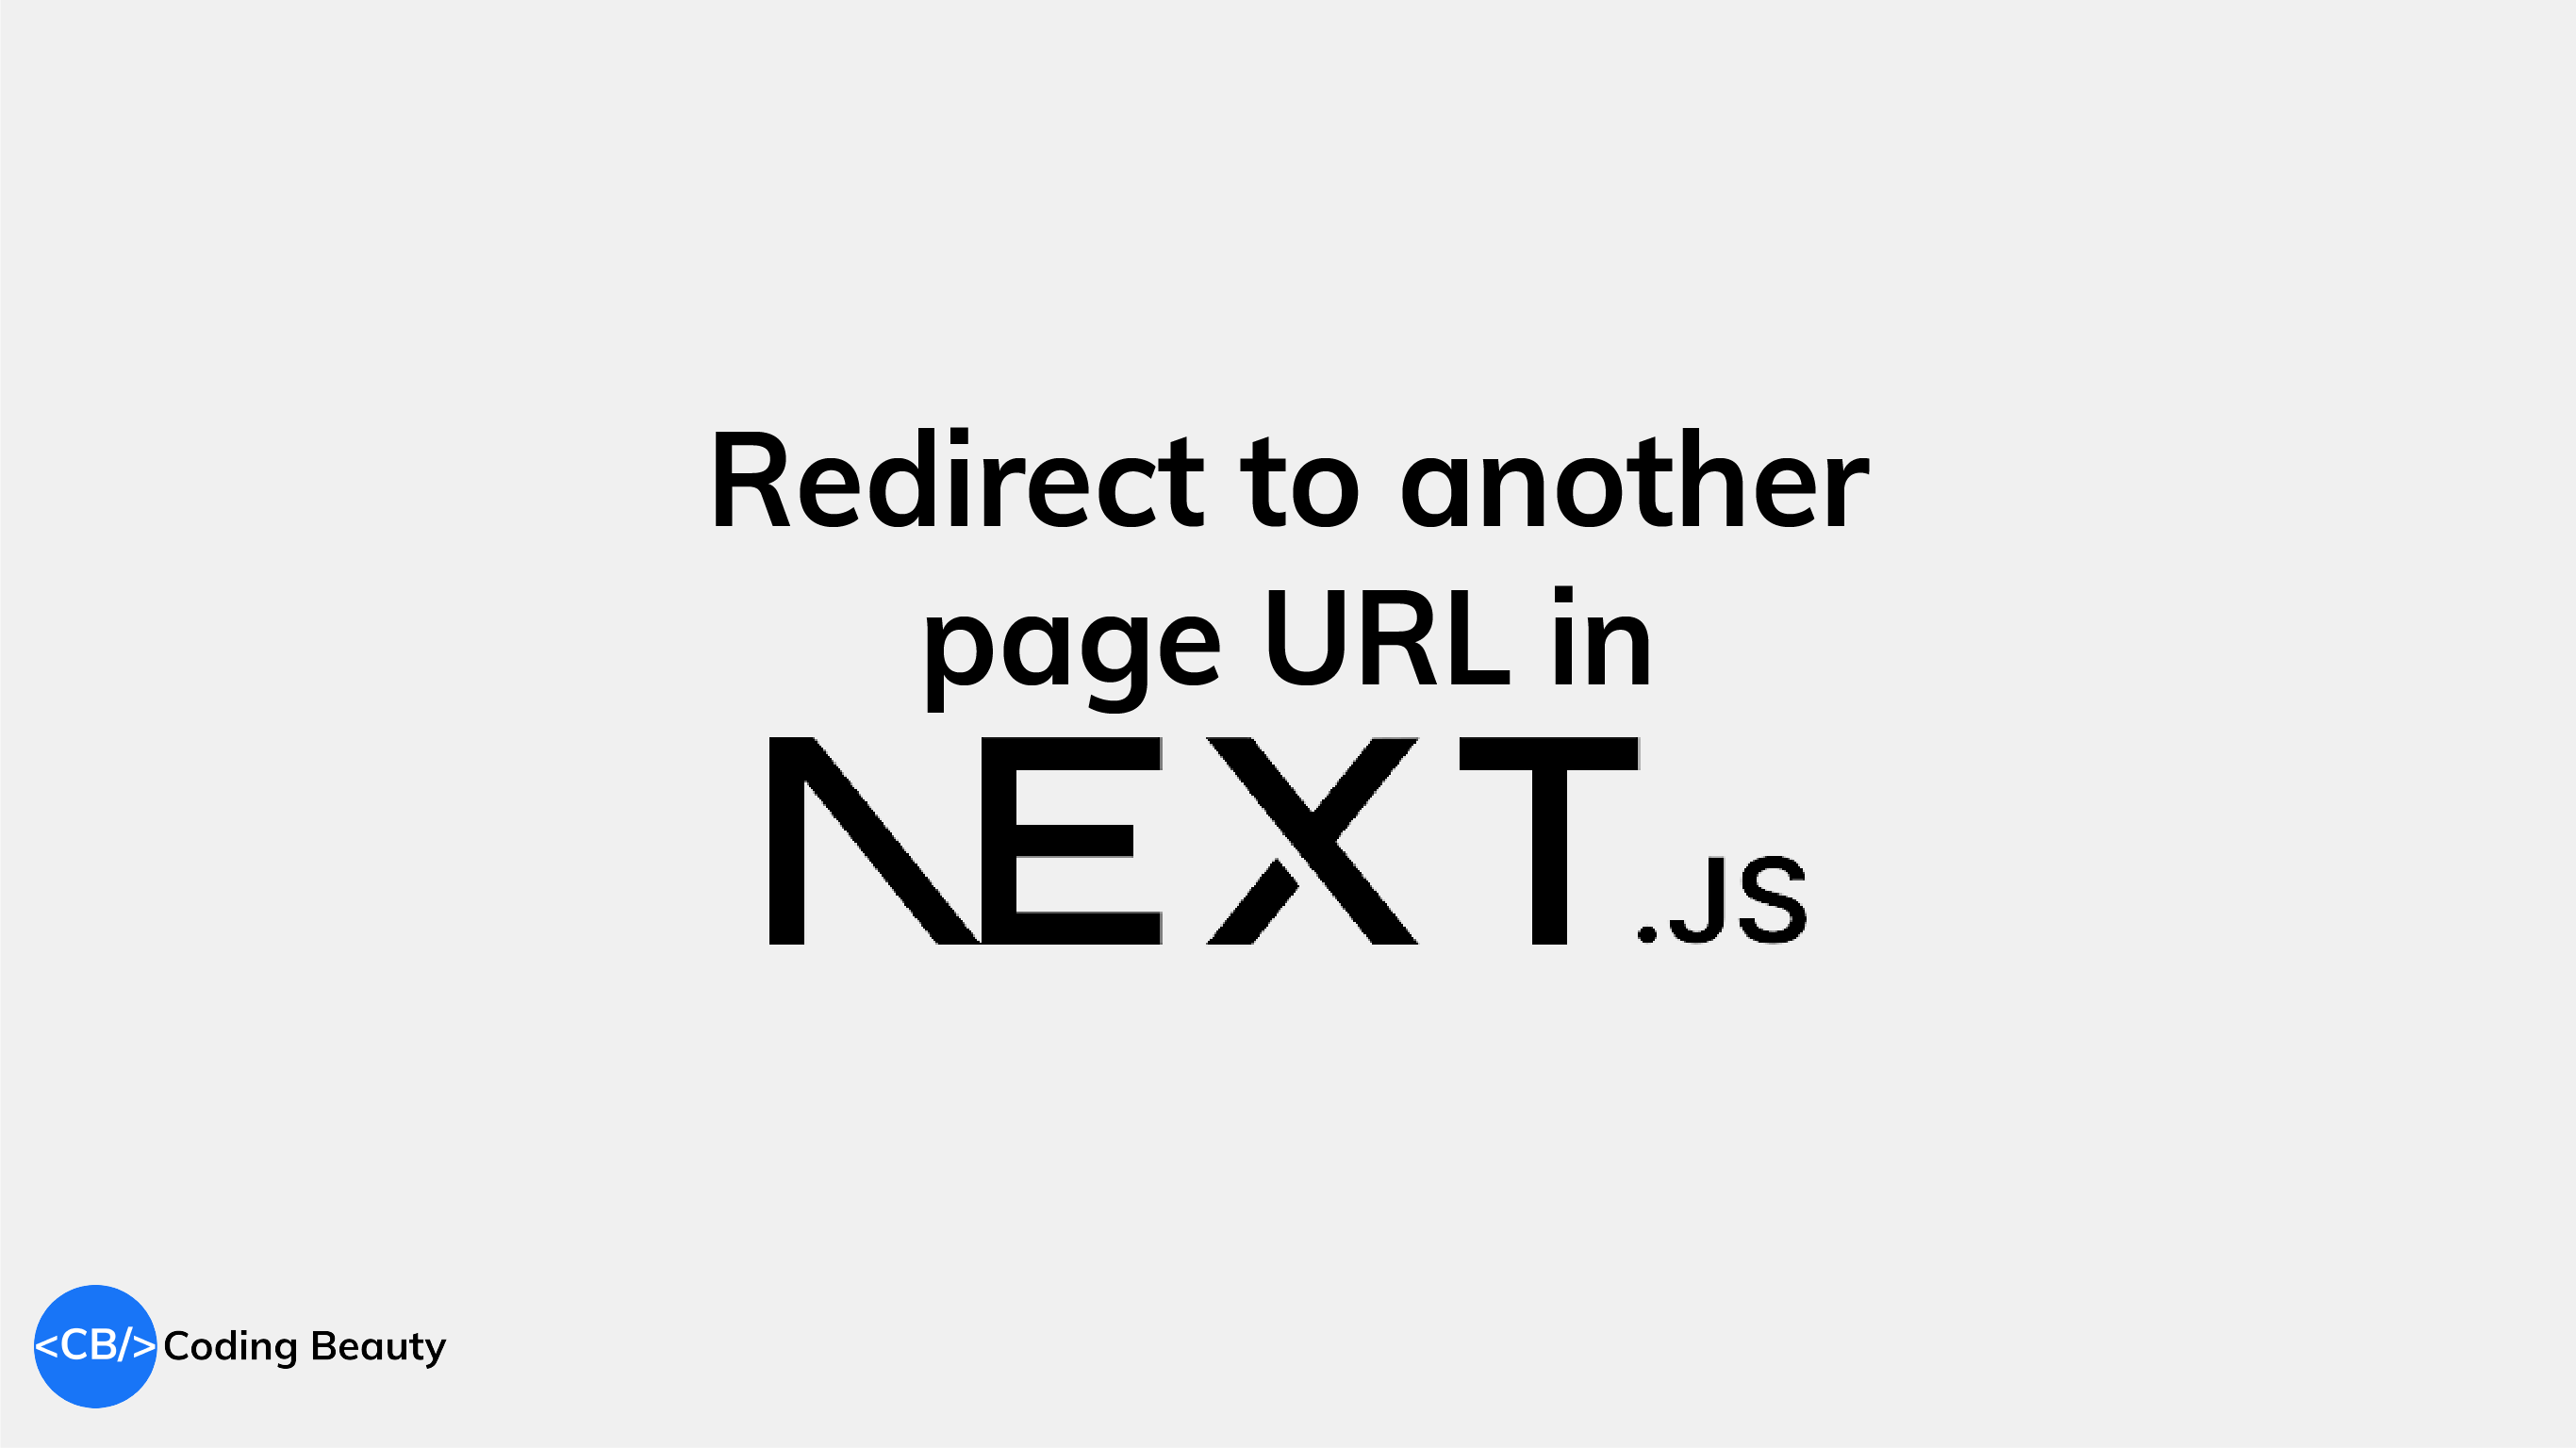 How to quickly redirect to another page URL in Next.js